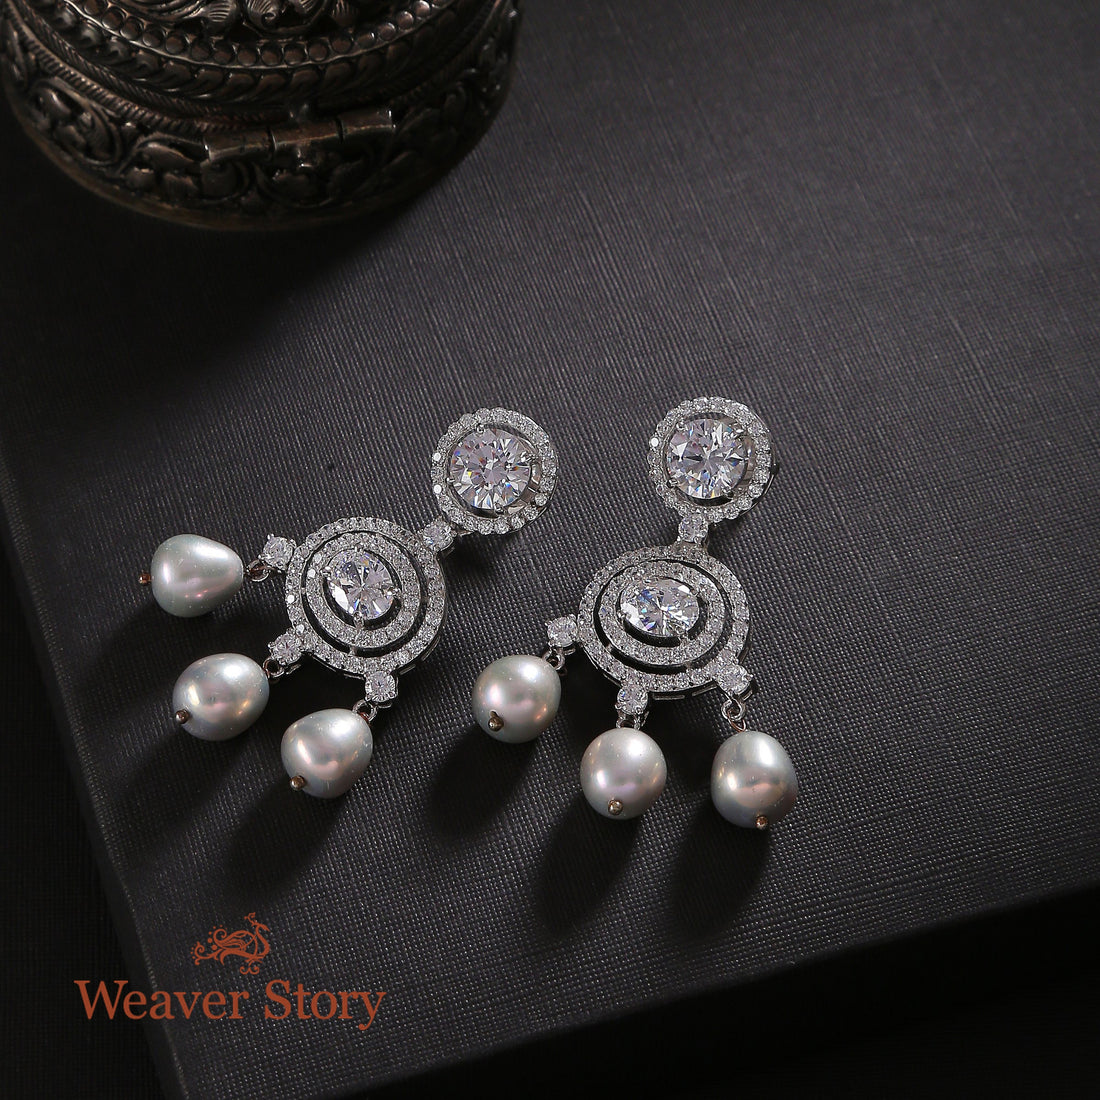 Shahina_Earrings_with_Zircons_Crafted_in_Pure_Silver_WeaverStory_01